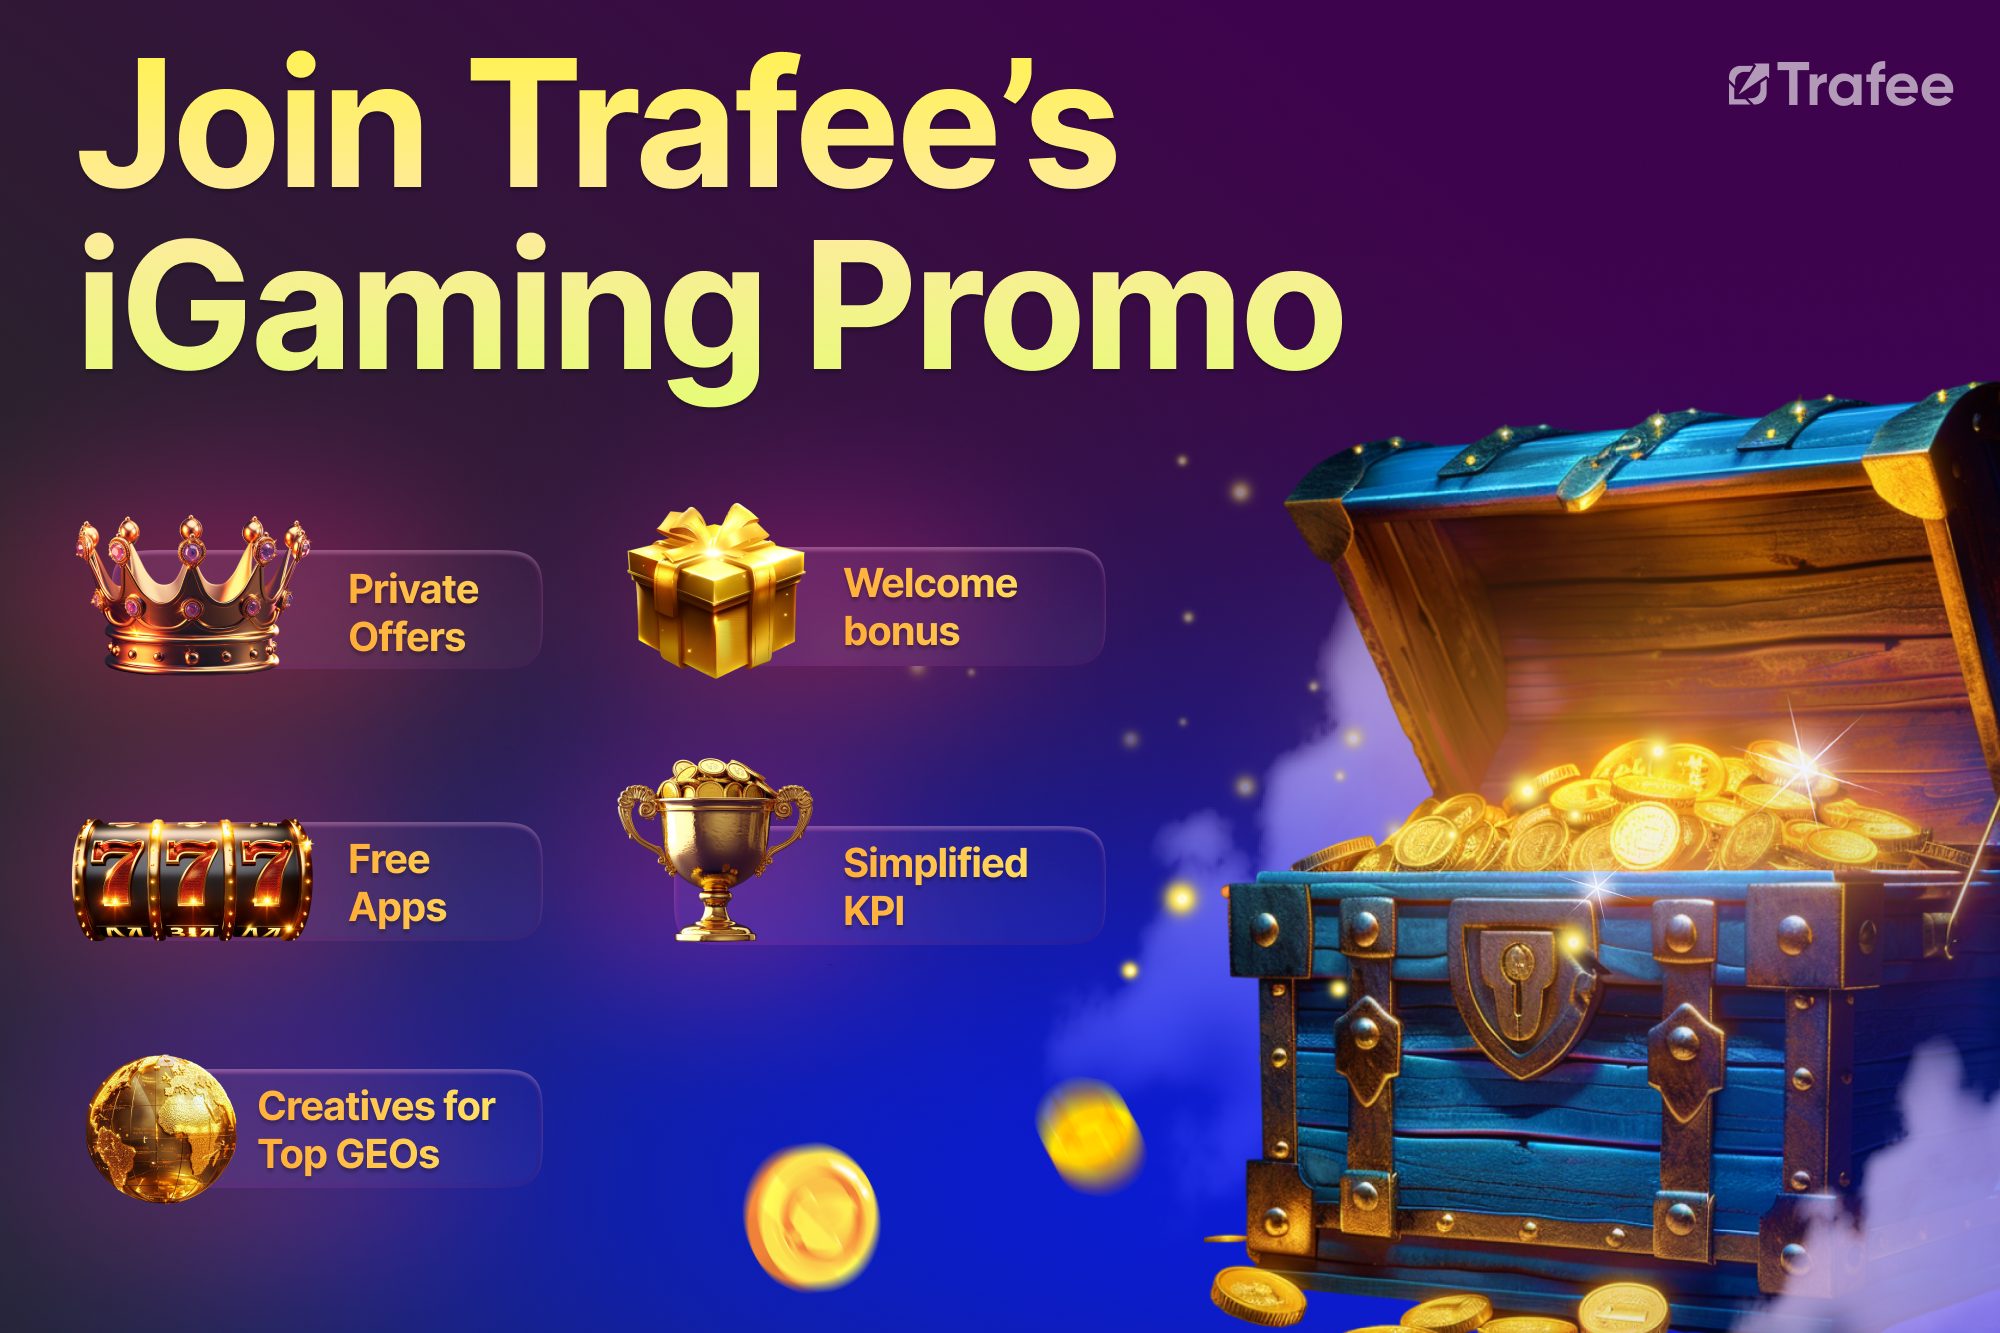 Join the iGaming Promo with Trafee!